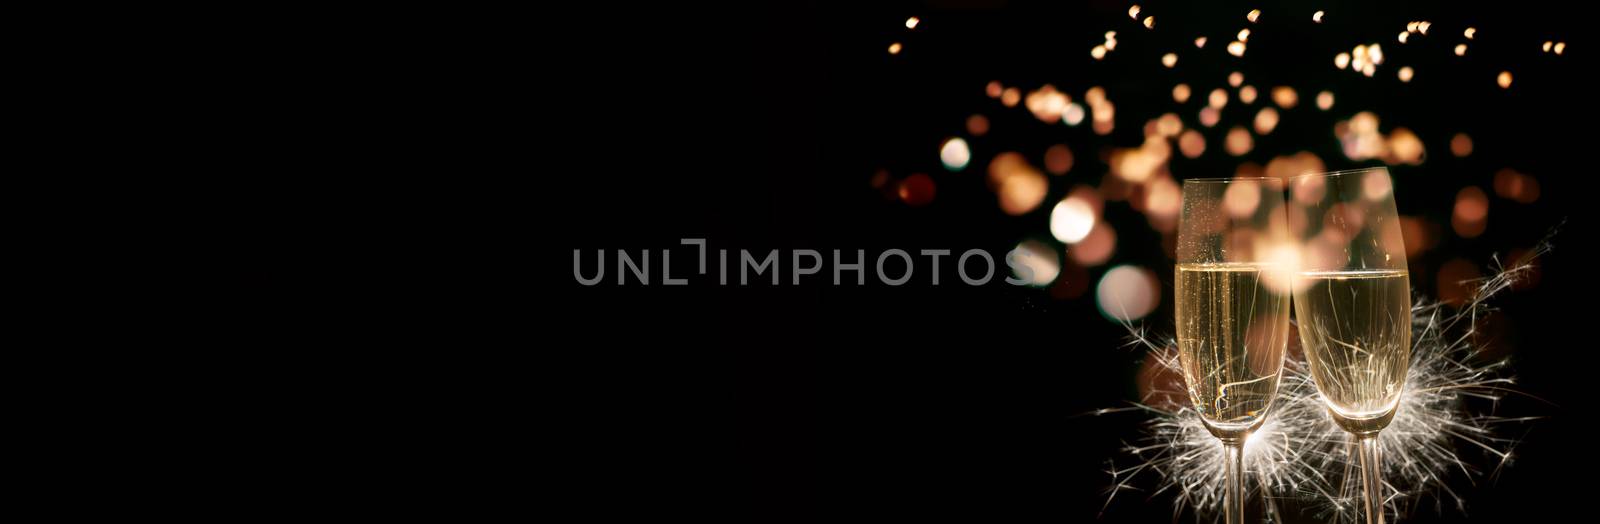 Image of two champagne glasses with burning sparkler on black background